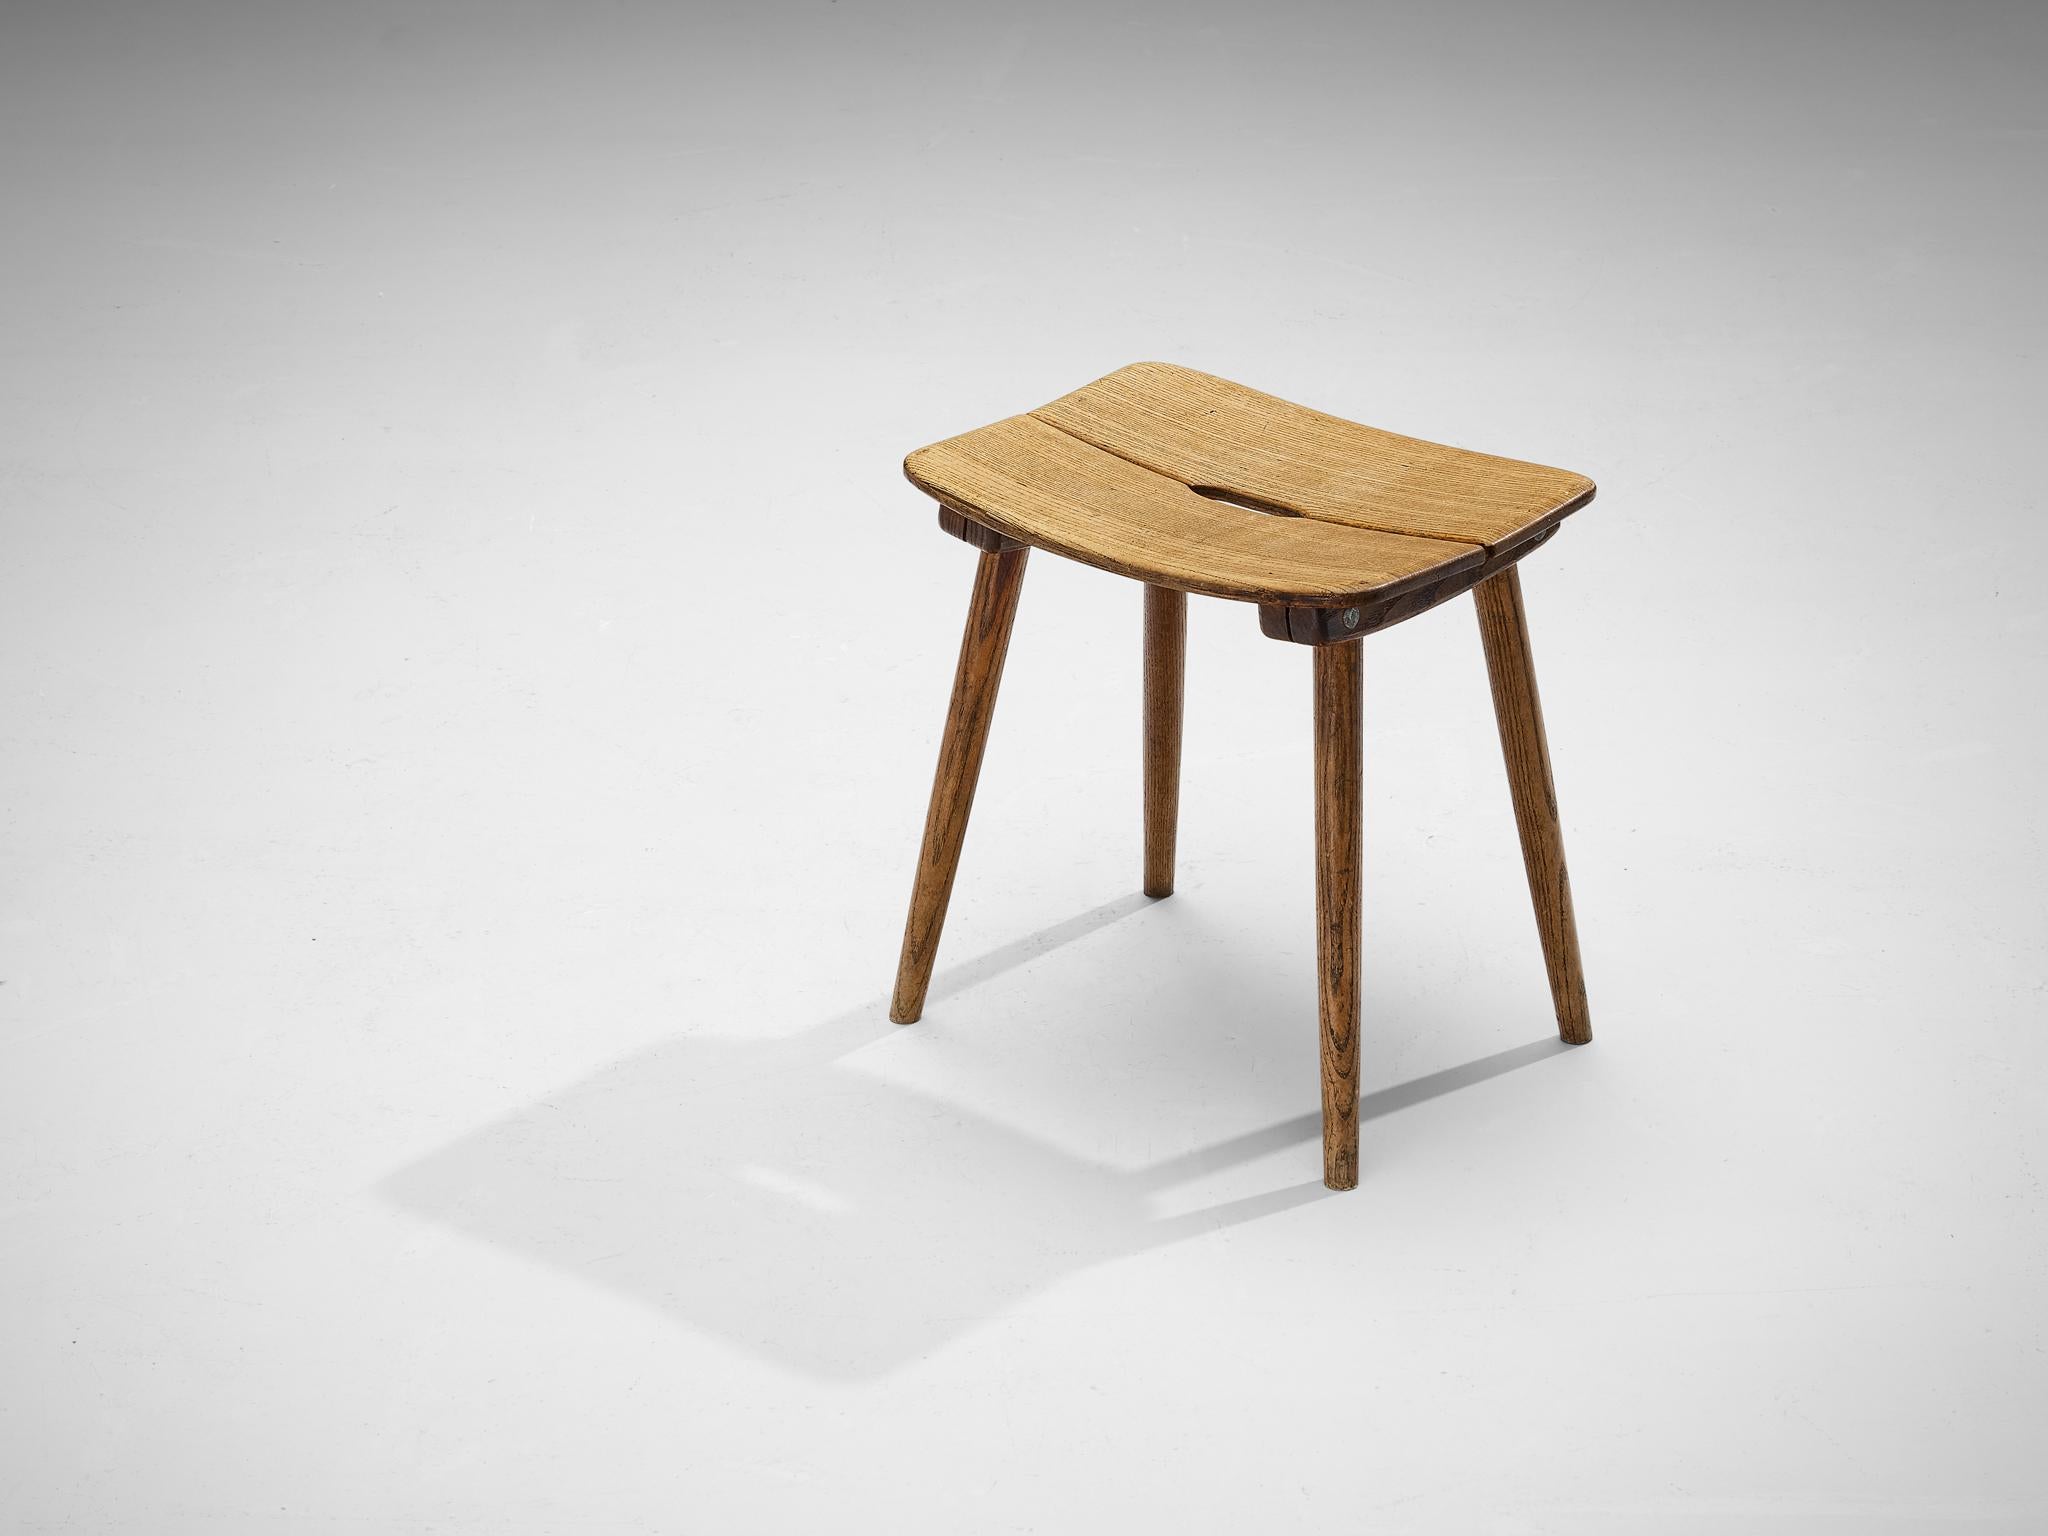 Jacob Müller for Wohnhilfe, stool, ash, Switzerland, production  1945/1960

This stool of Swiss origin is a design by Jacob Müller for Wohnhilfe and was in production from 1945 until 1960. The design is simple yet refined in its construction. The